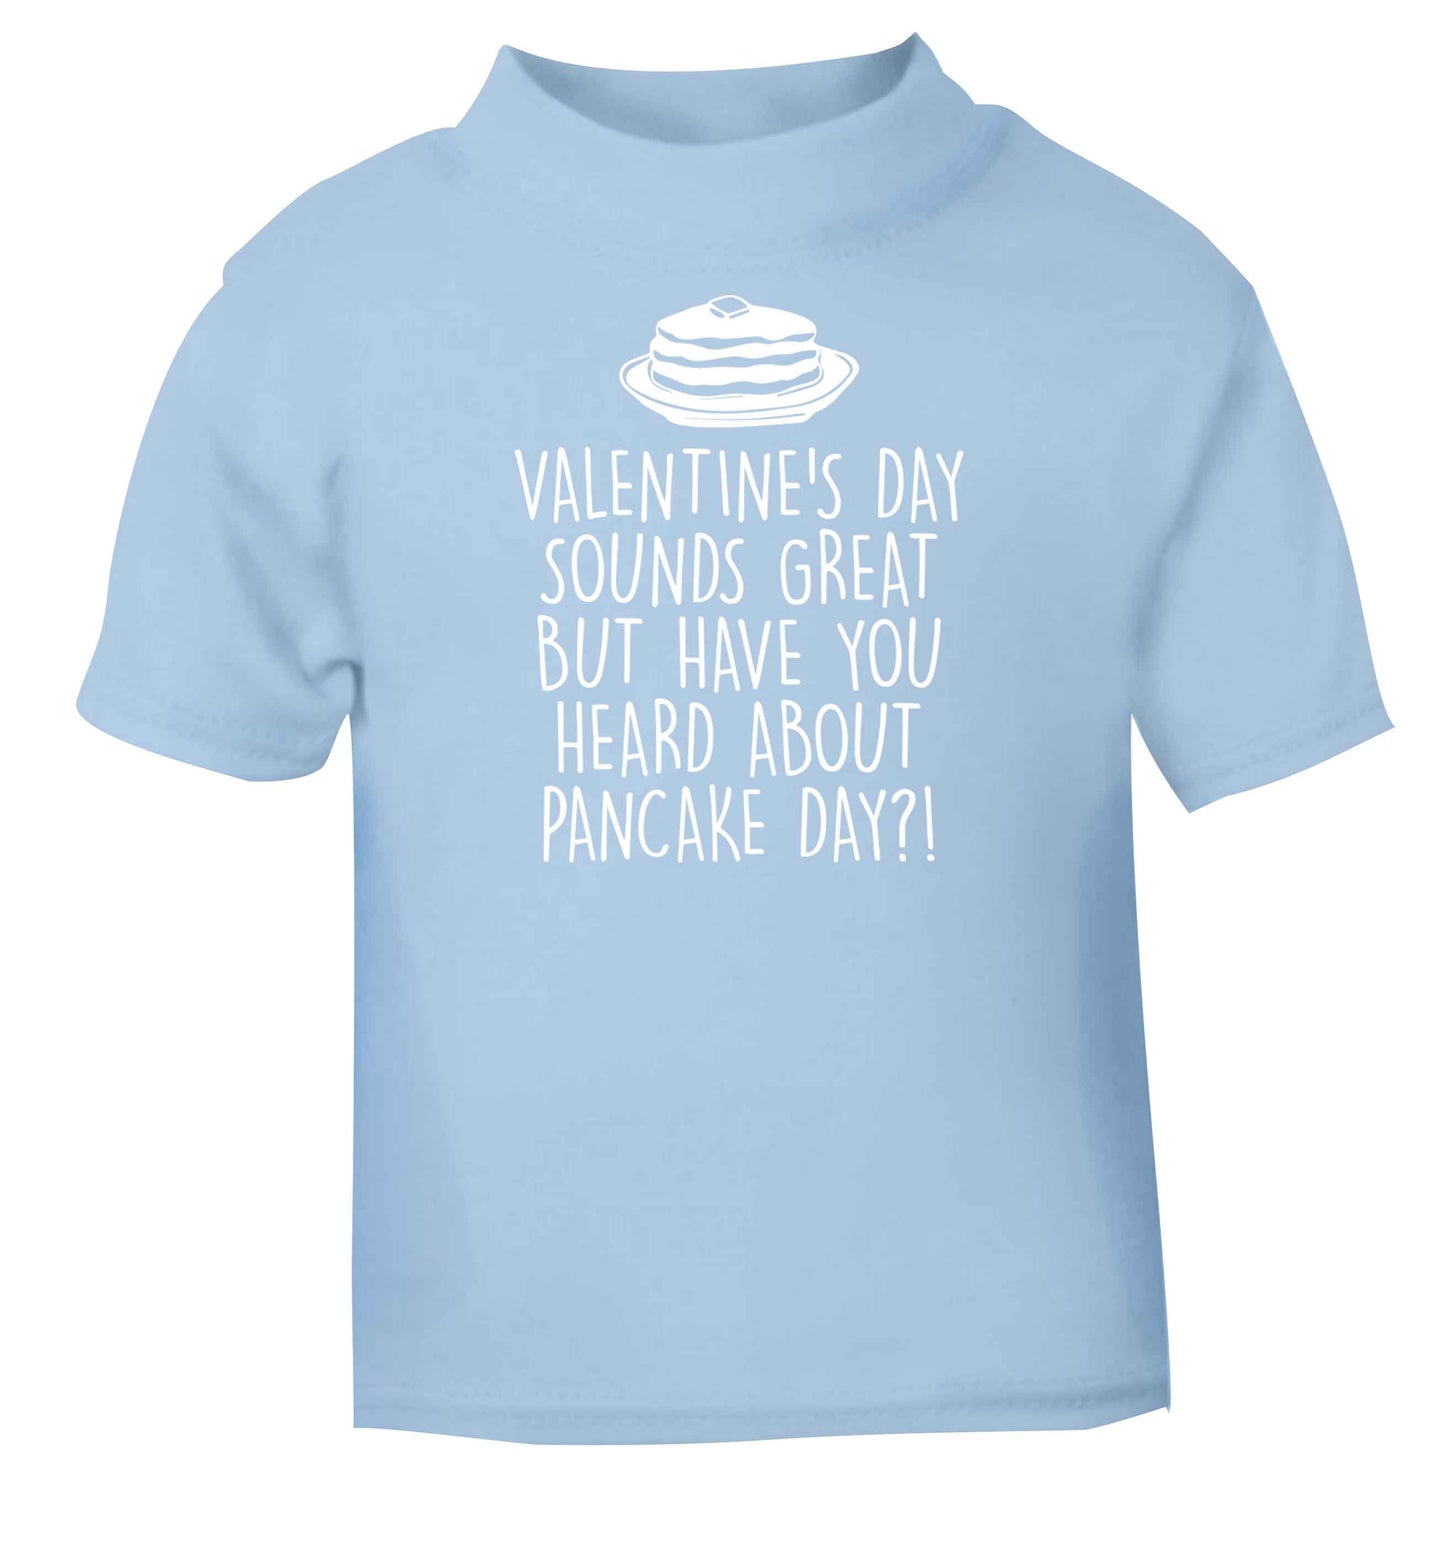 Valentine's day sounds great but have you heard about pancake day?! light blue baby toddler Tshirt 2 Years